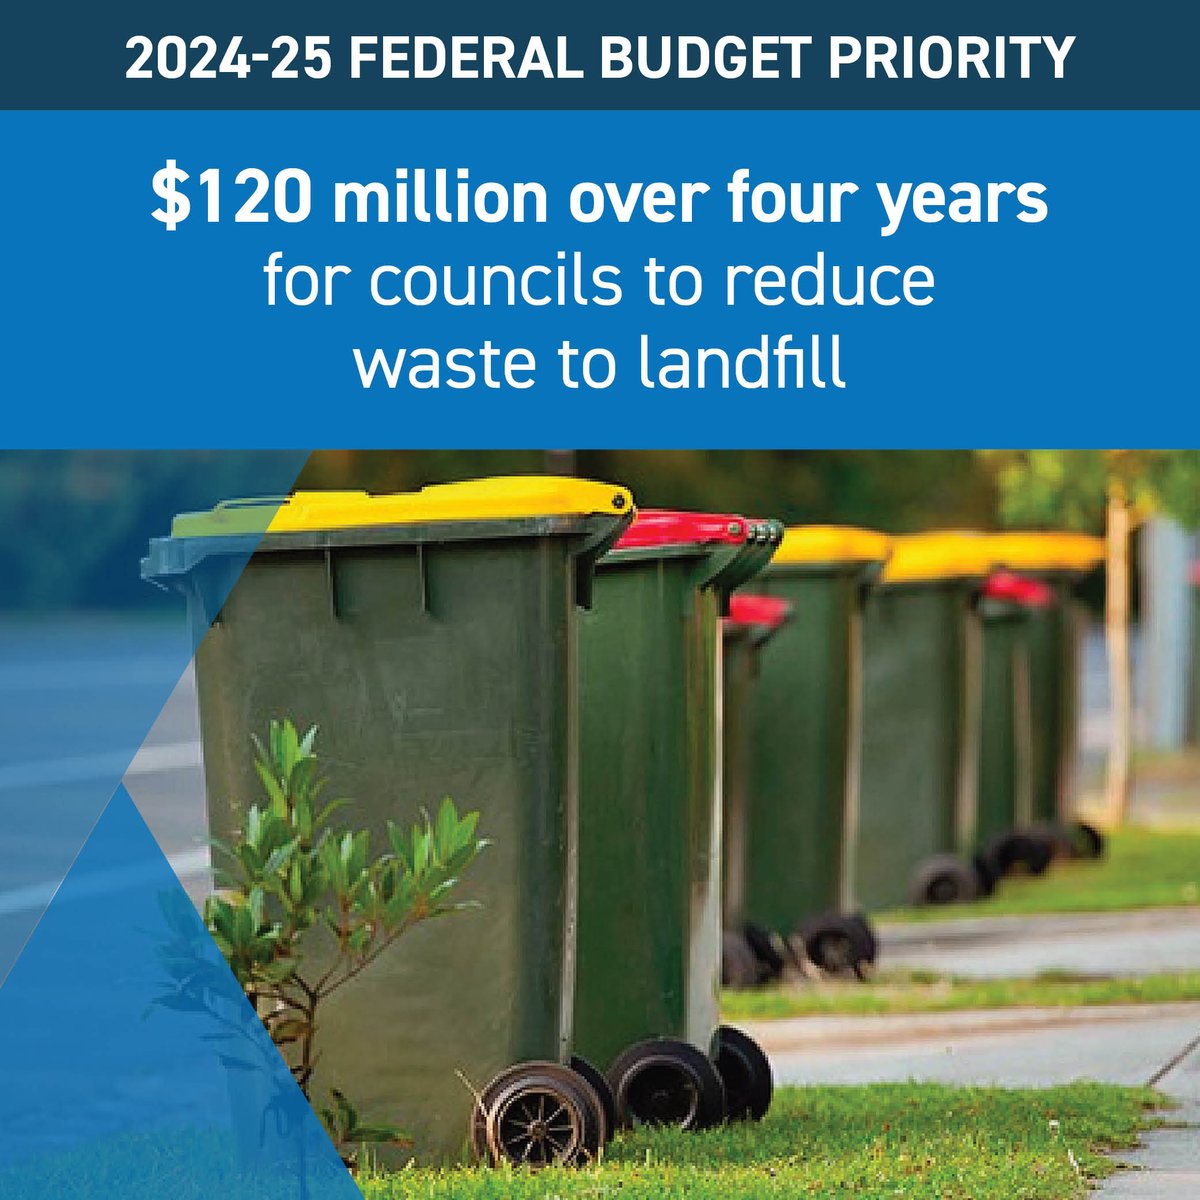 We want the Federal Government to provide $120 million over 4 years to standardise #bins across Australia to reduce #waste to landfill. Standardising lids would allow us to run an education campaign so people know what to put in their #bins. Read more 👉bit.ly/3WdTOIq